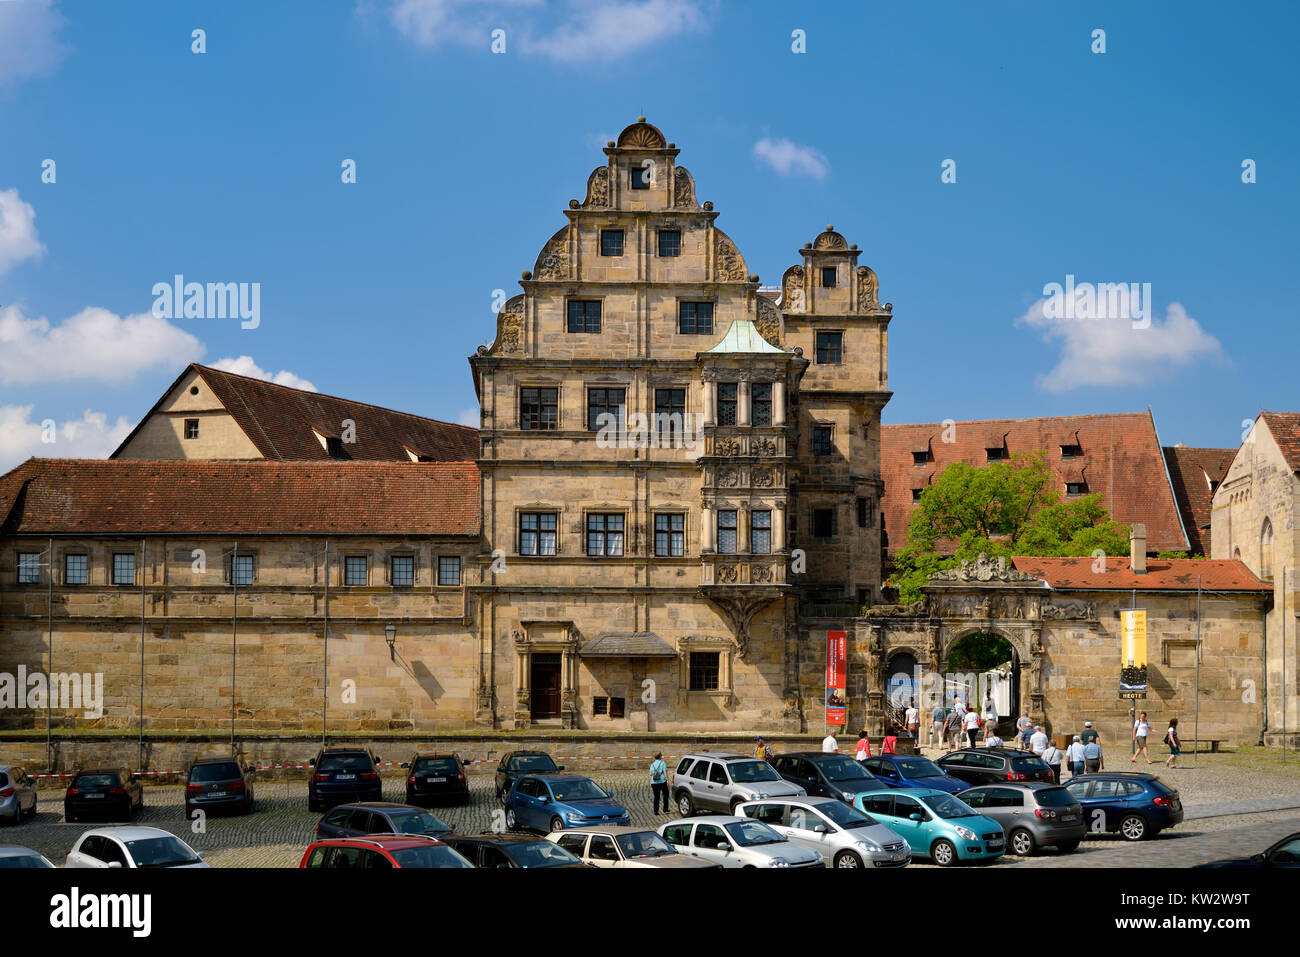 Old royal household on the cathedral place Bamberg, Bamberg, Alte Hofhaltung am Domplatz Bamberg Stock Photo